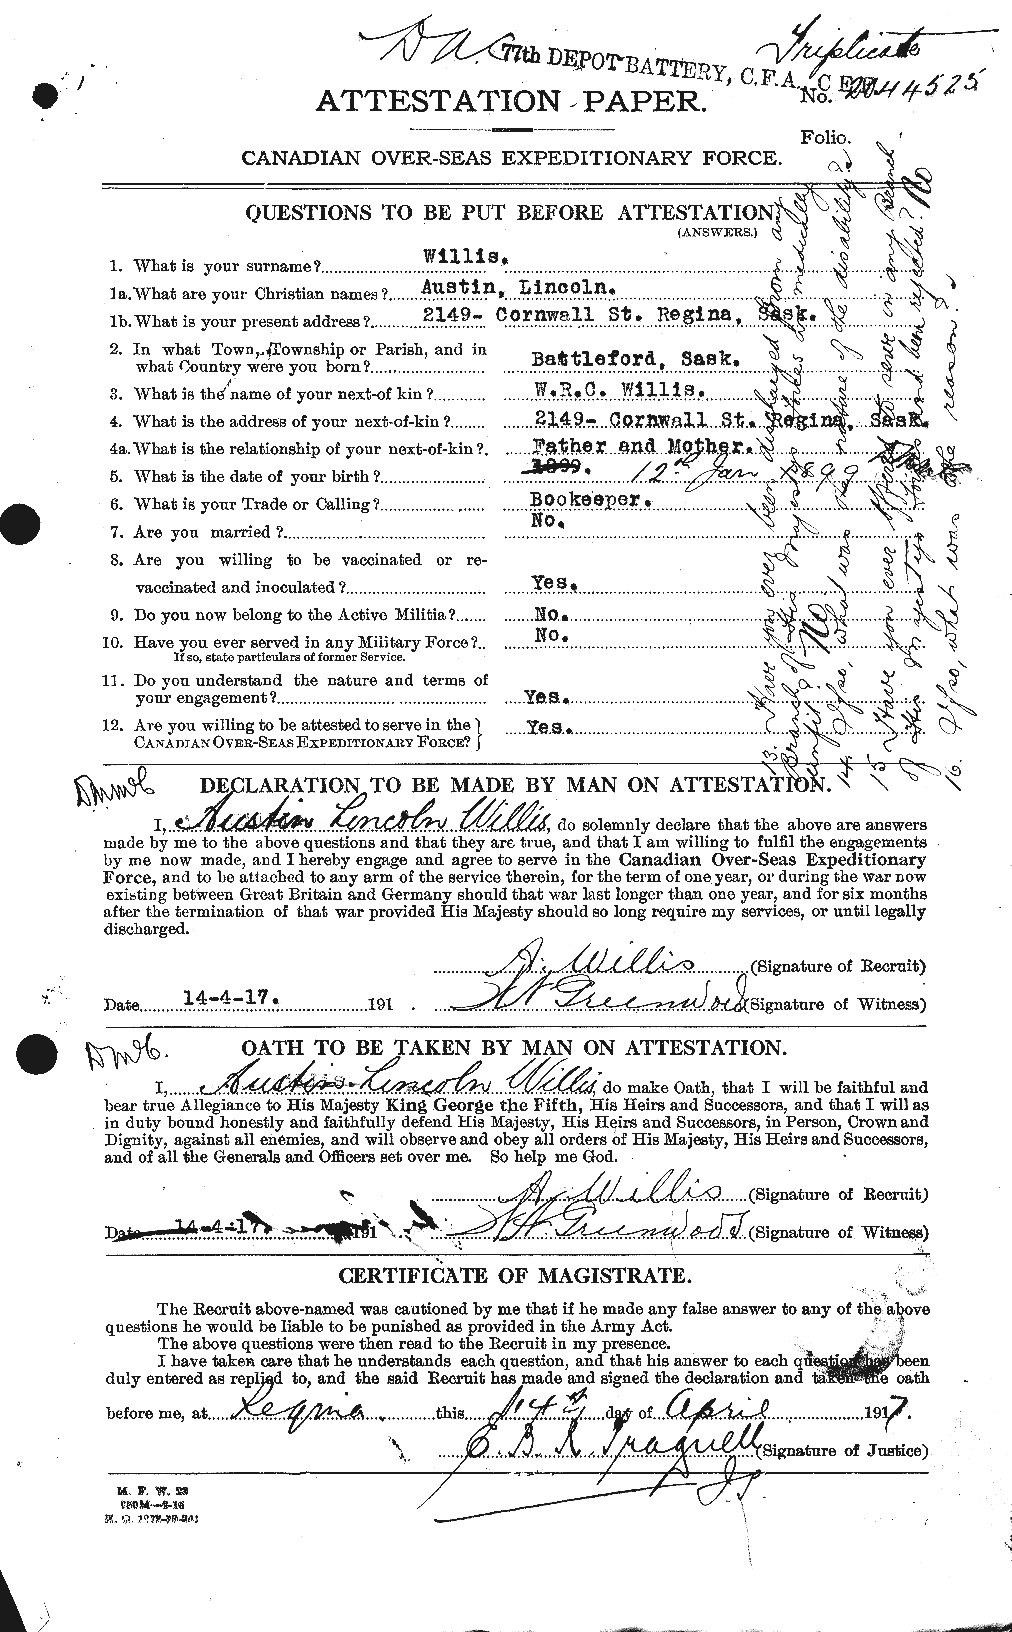 Personnel Records of the First World War - CEF 676387a